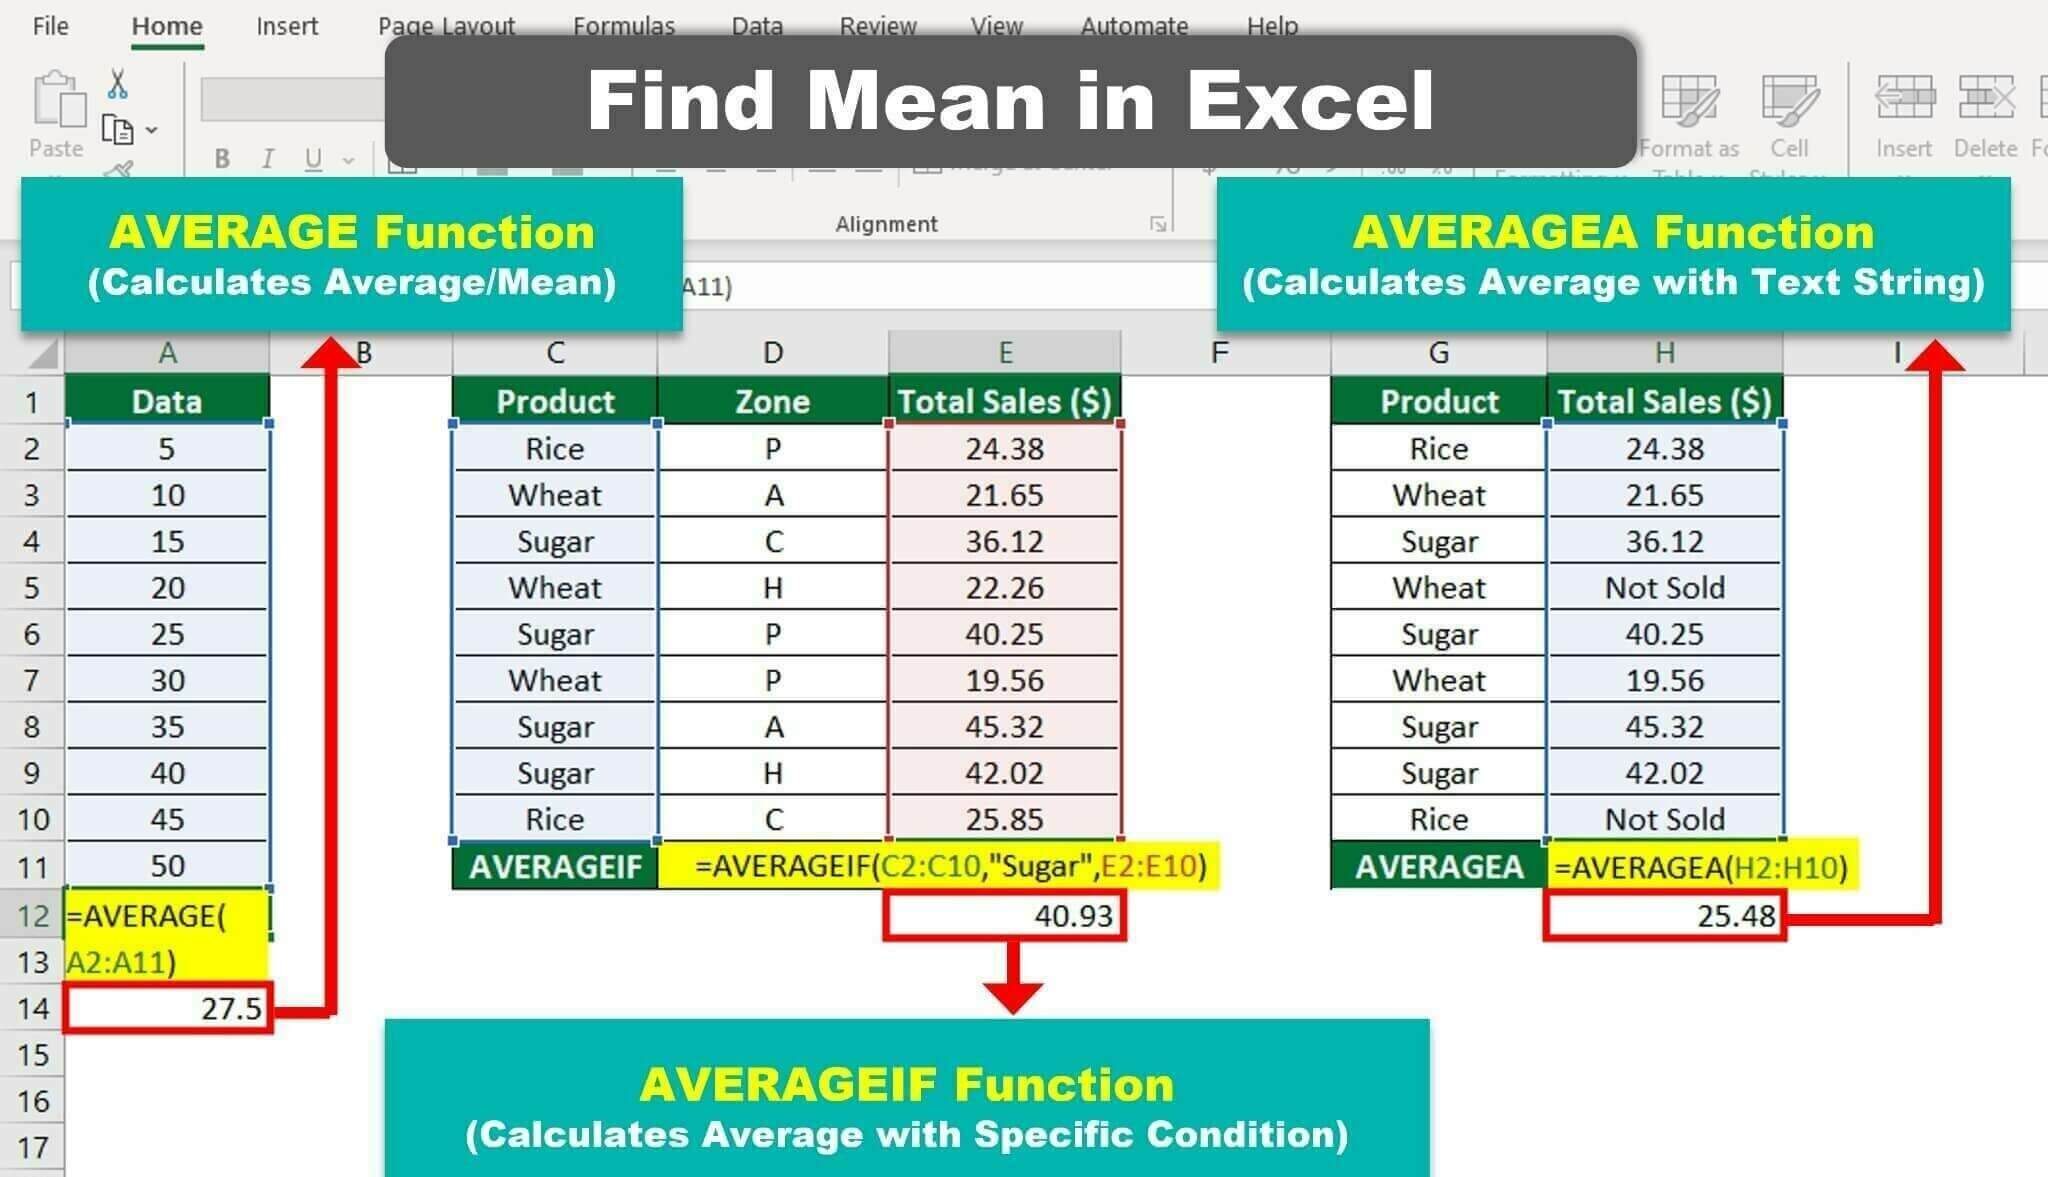 Find Mean in Excel